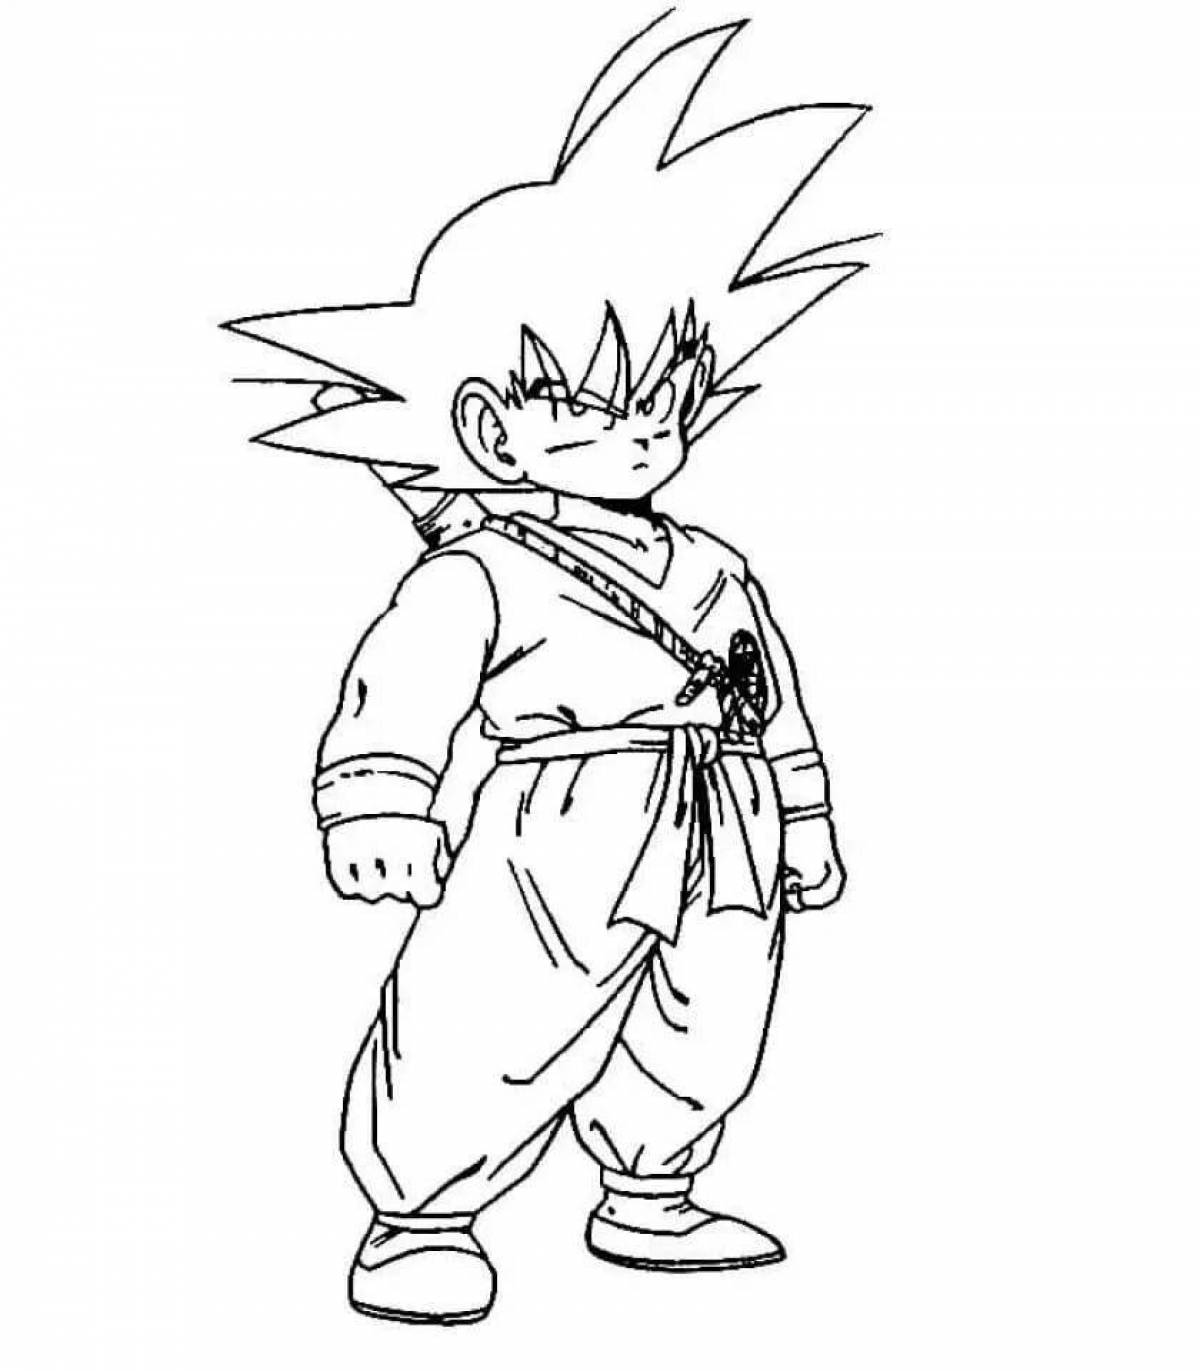 Ready goku coloring page